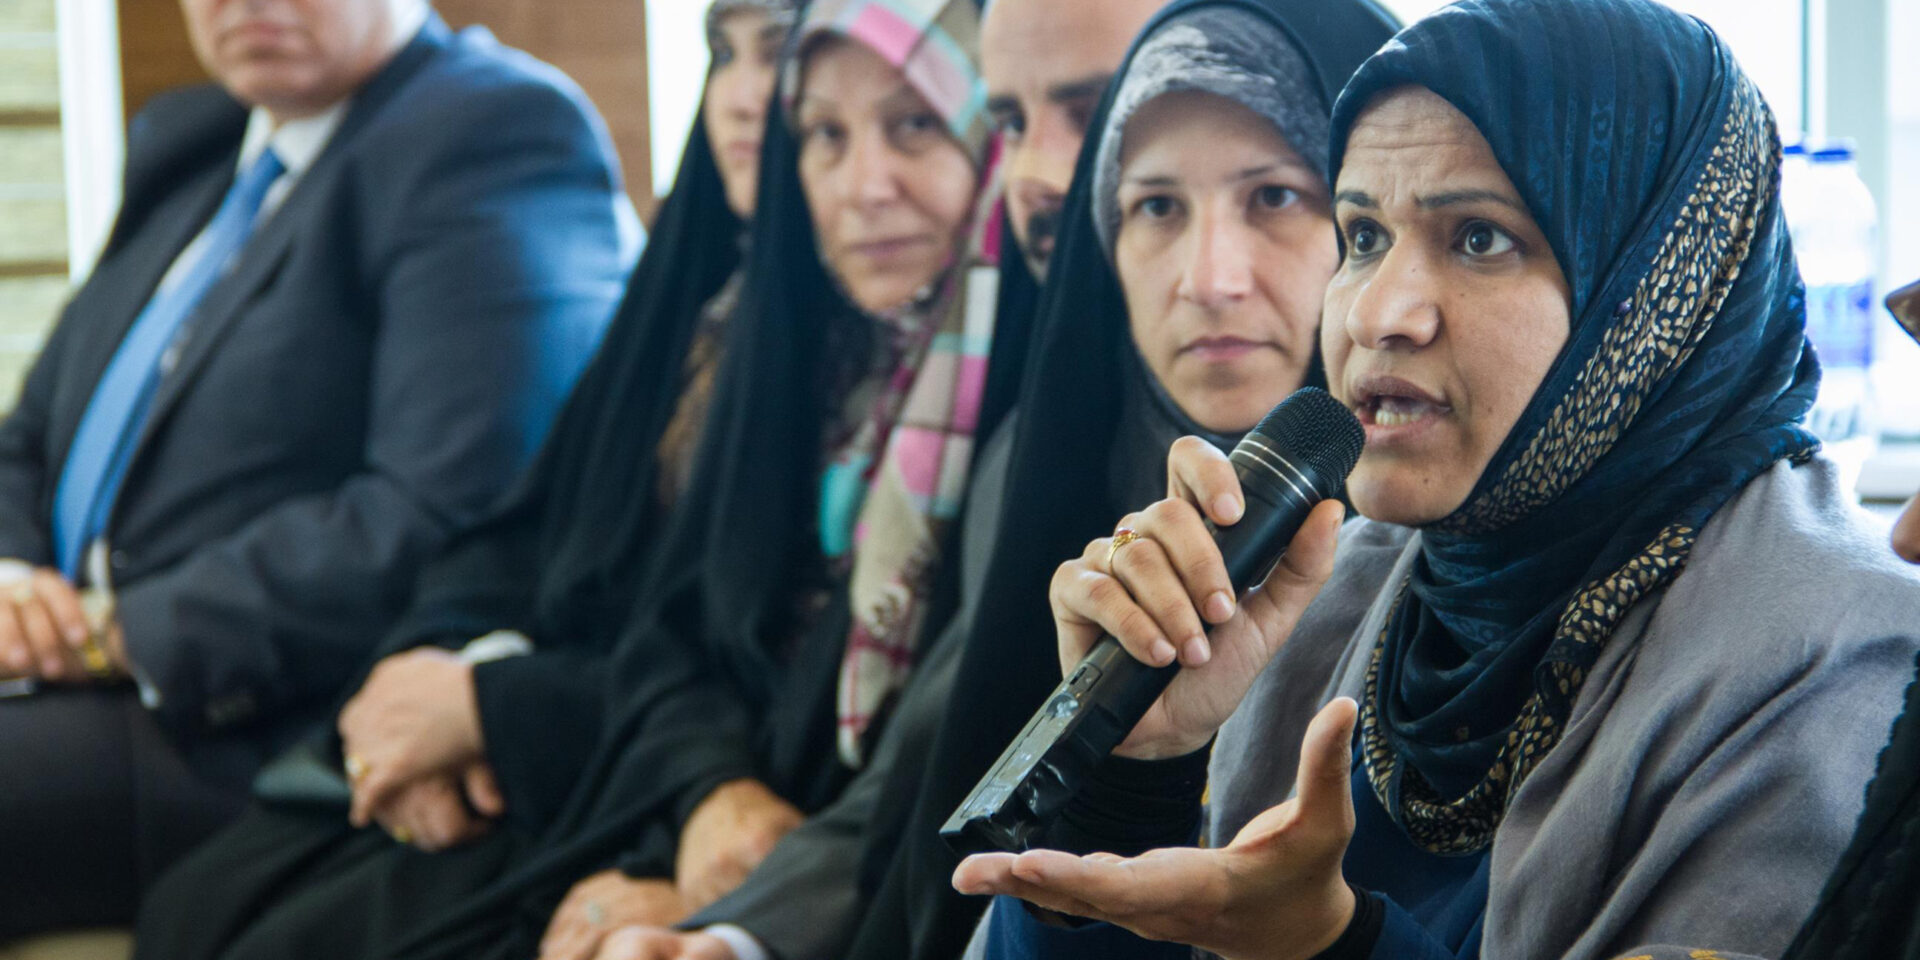 An Iraqi woman wearing a headscarf speaks into a microphone at a meeting.